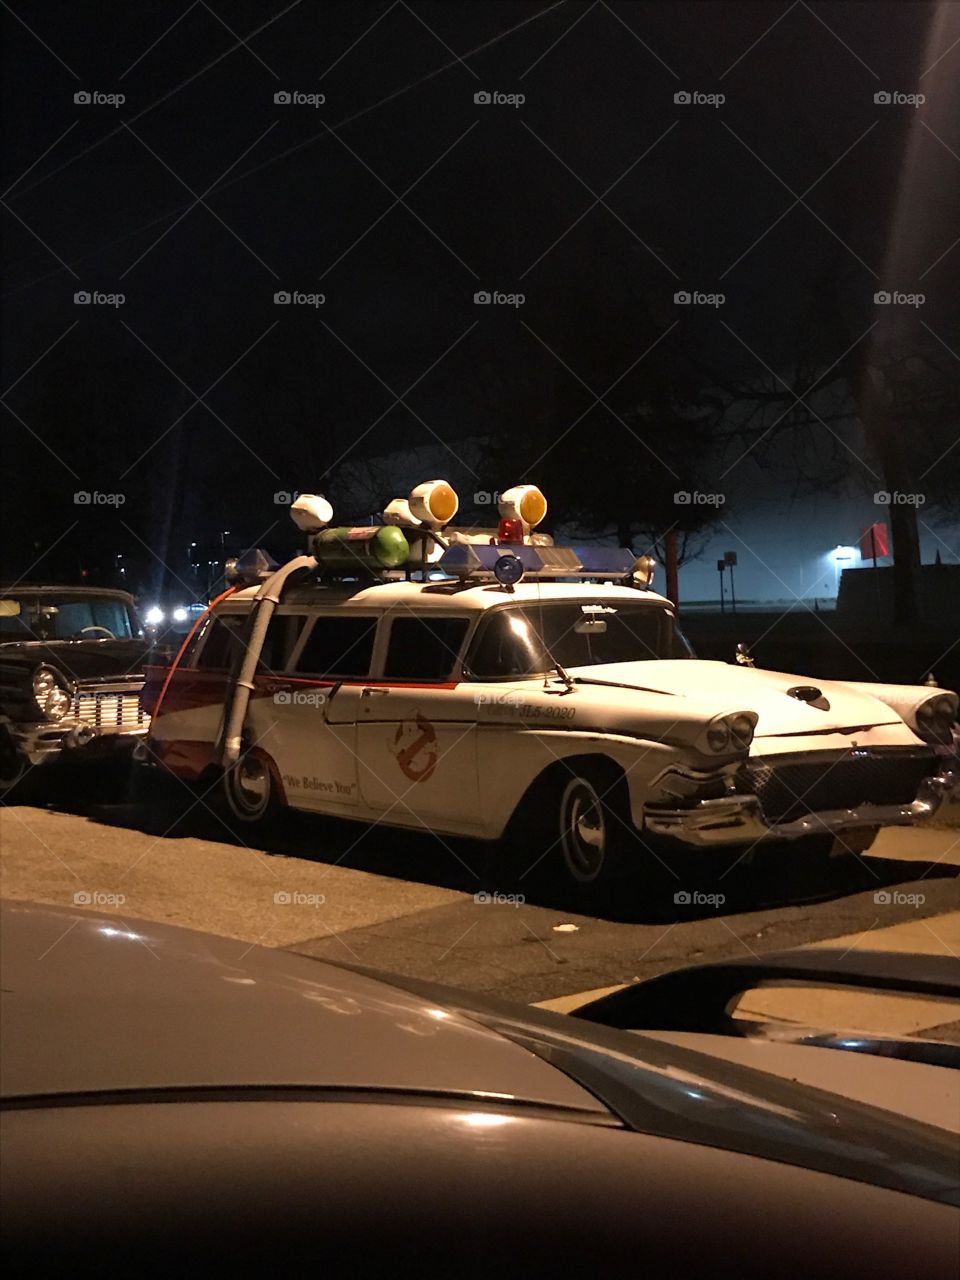 Ghostbusters car set up by neighbor for halloween.